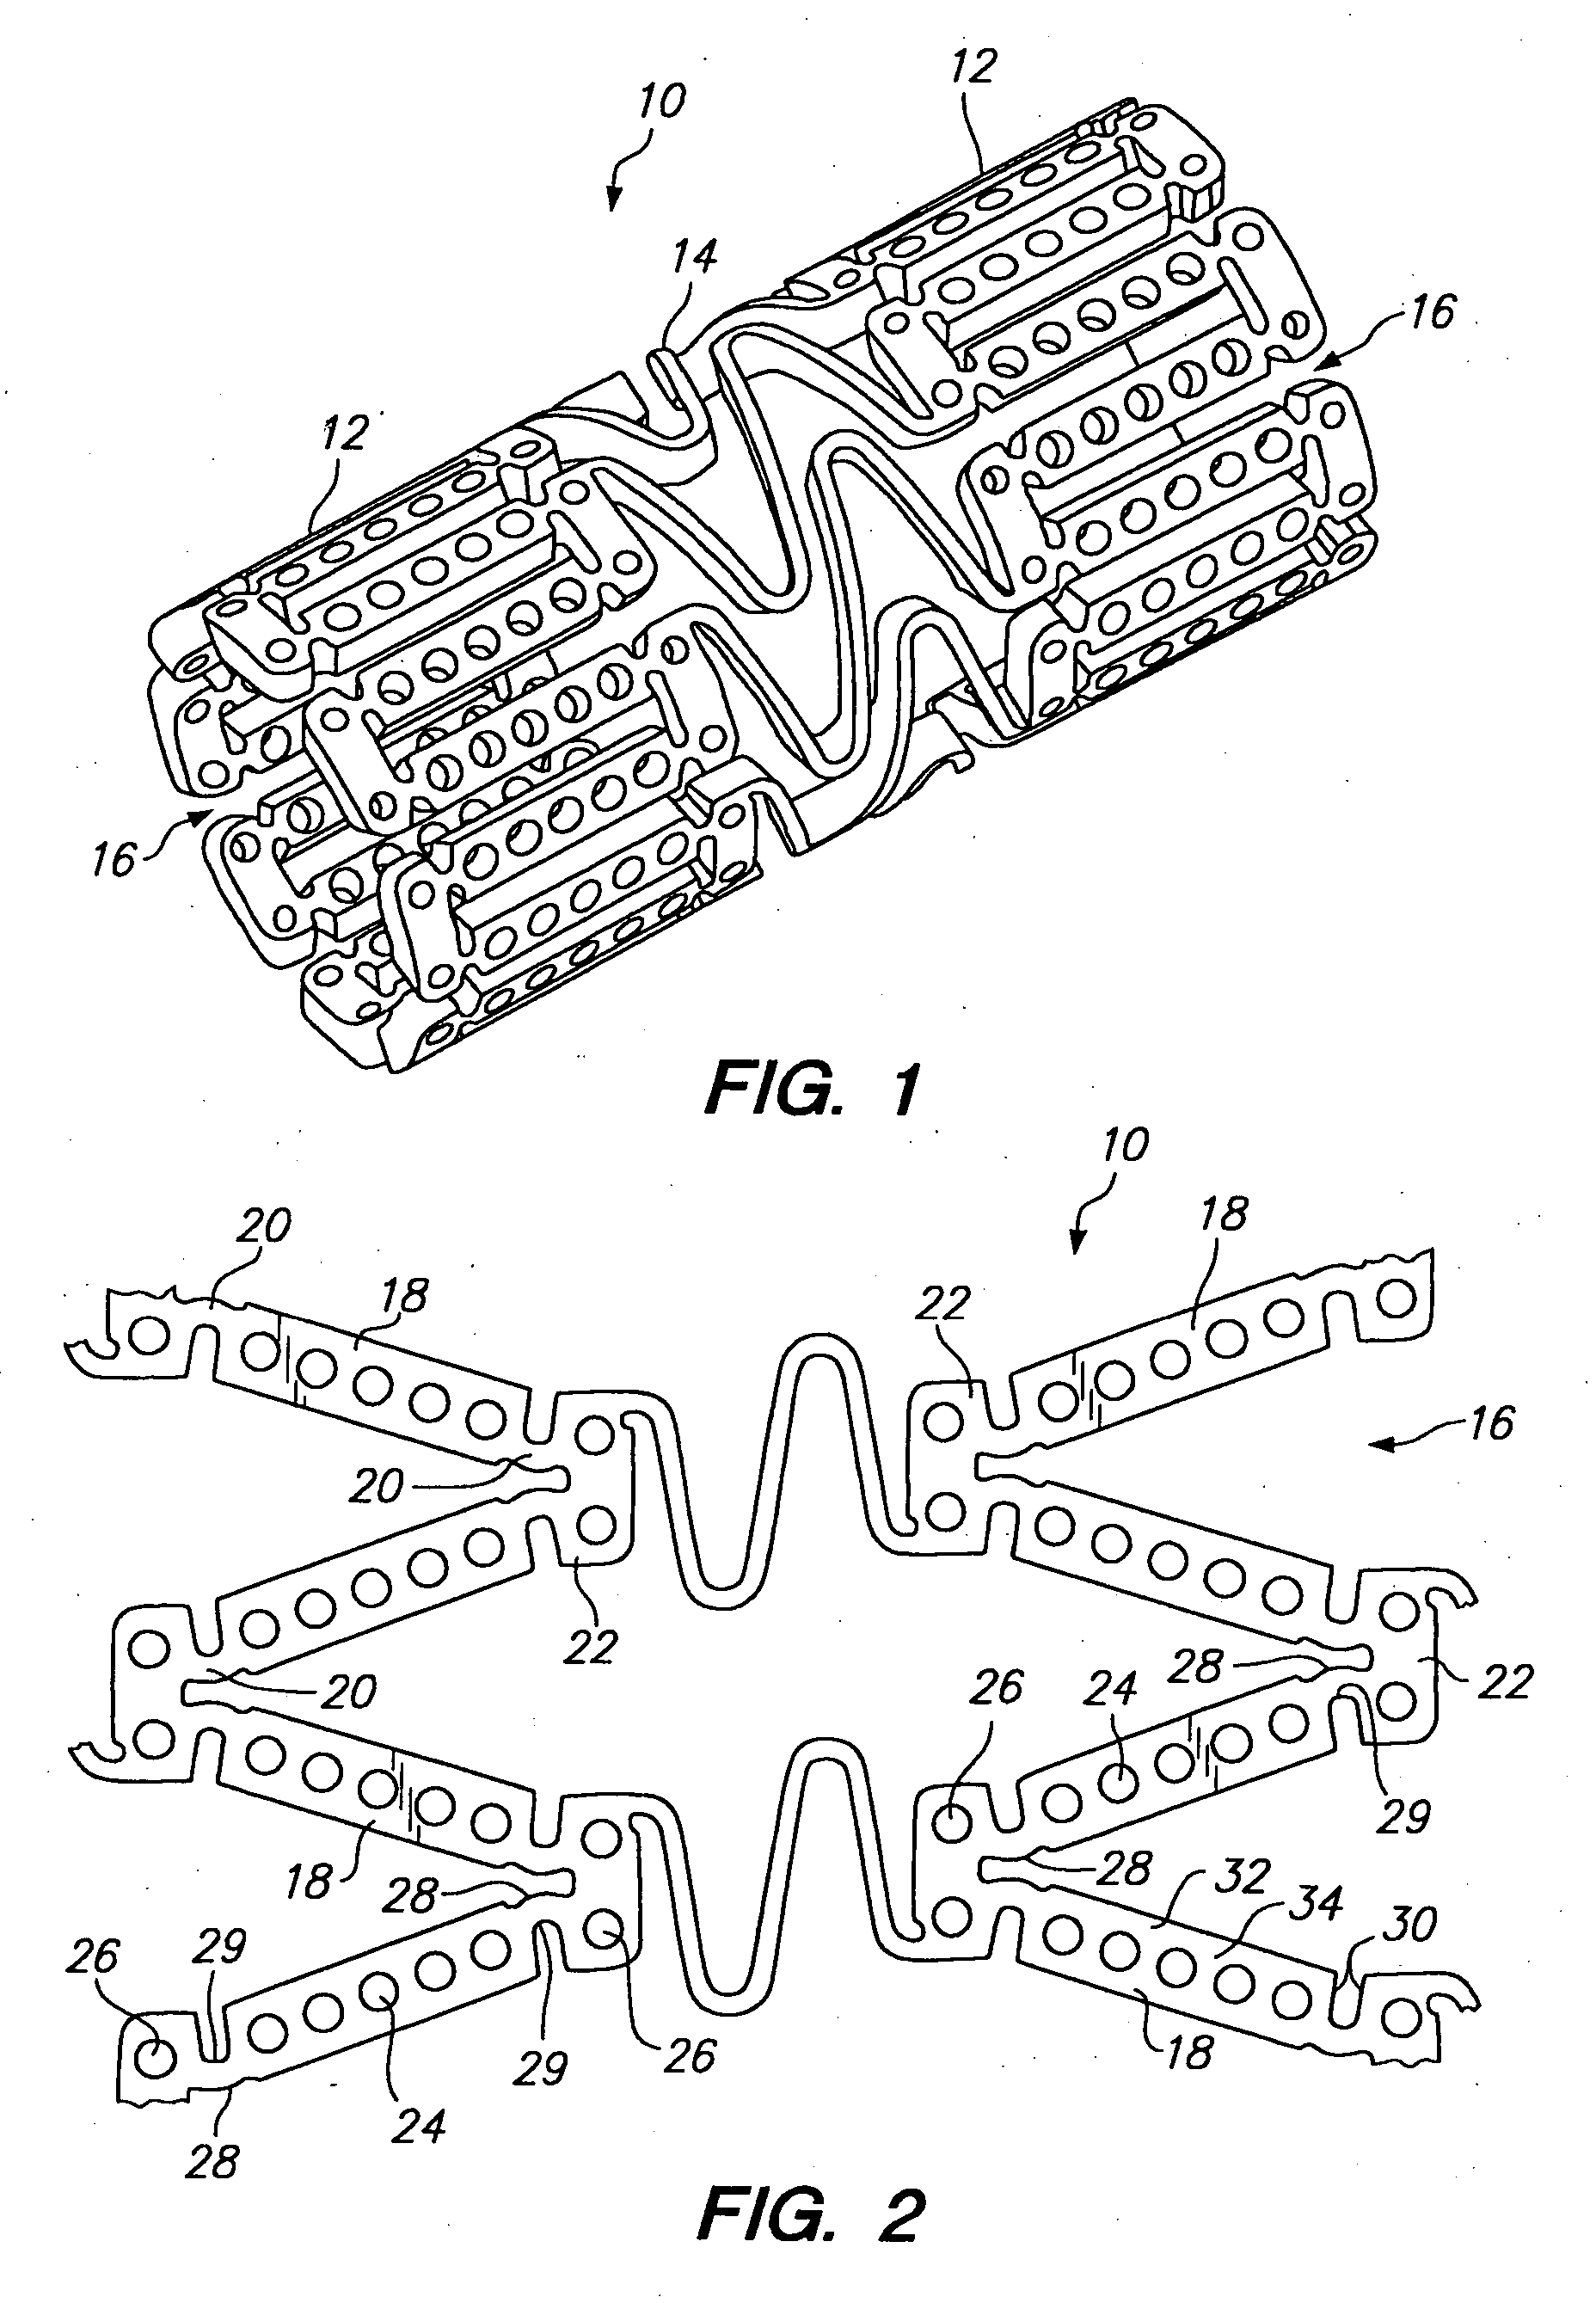 Expandable medical device for delivery of beneficial agent